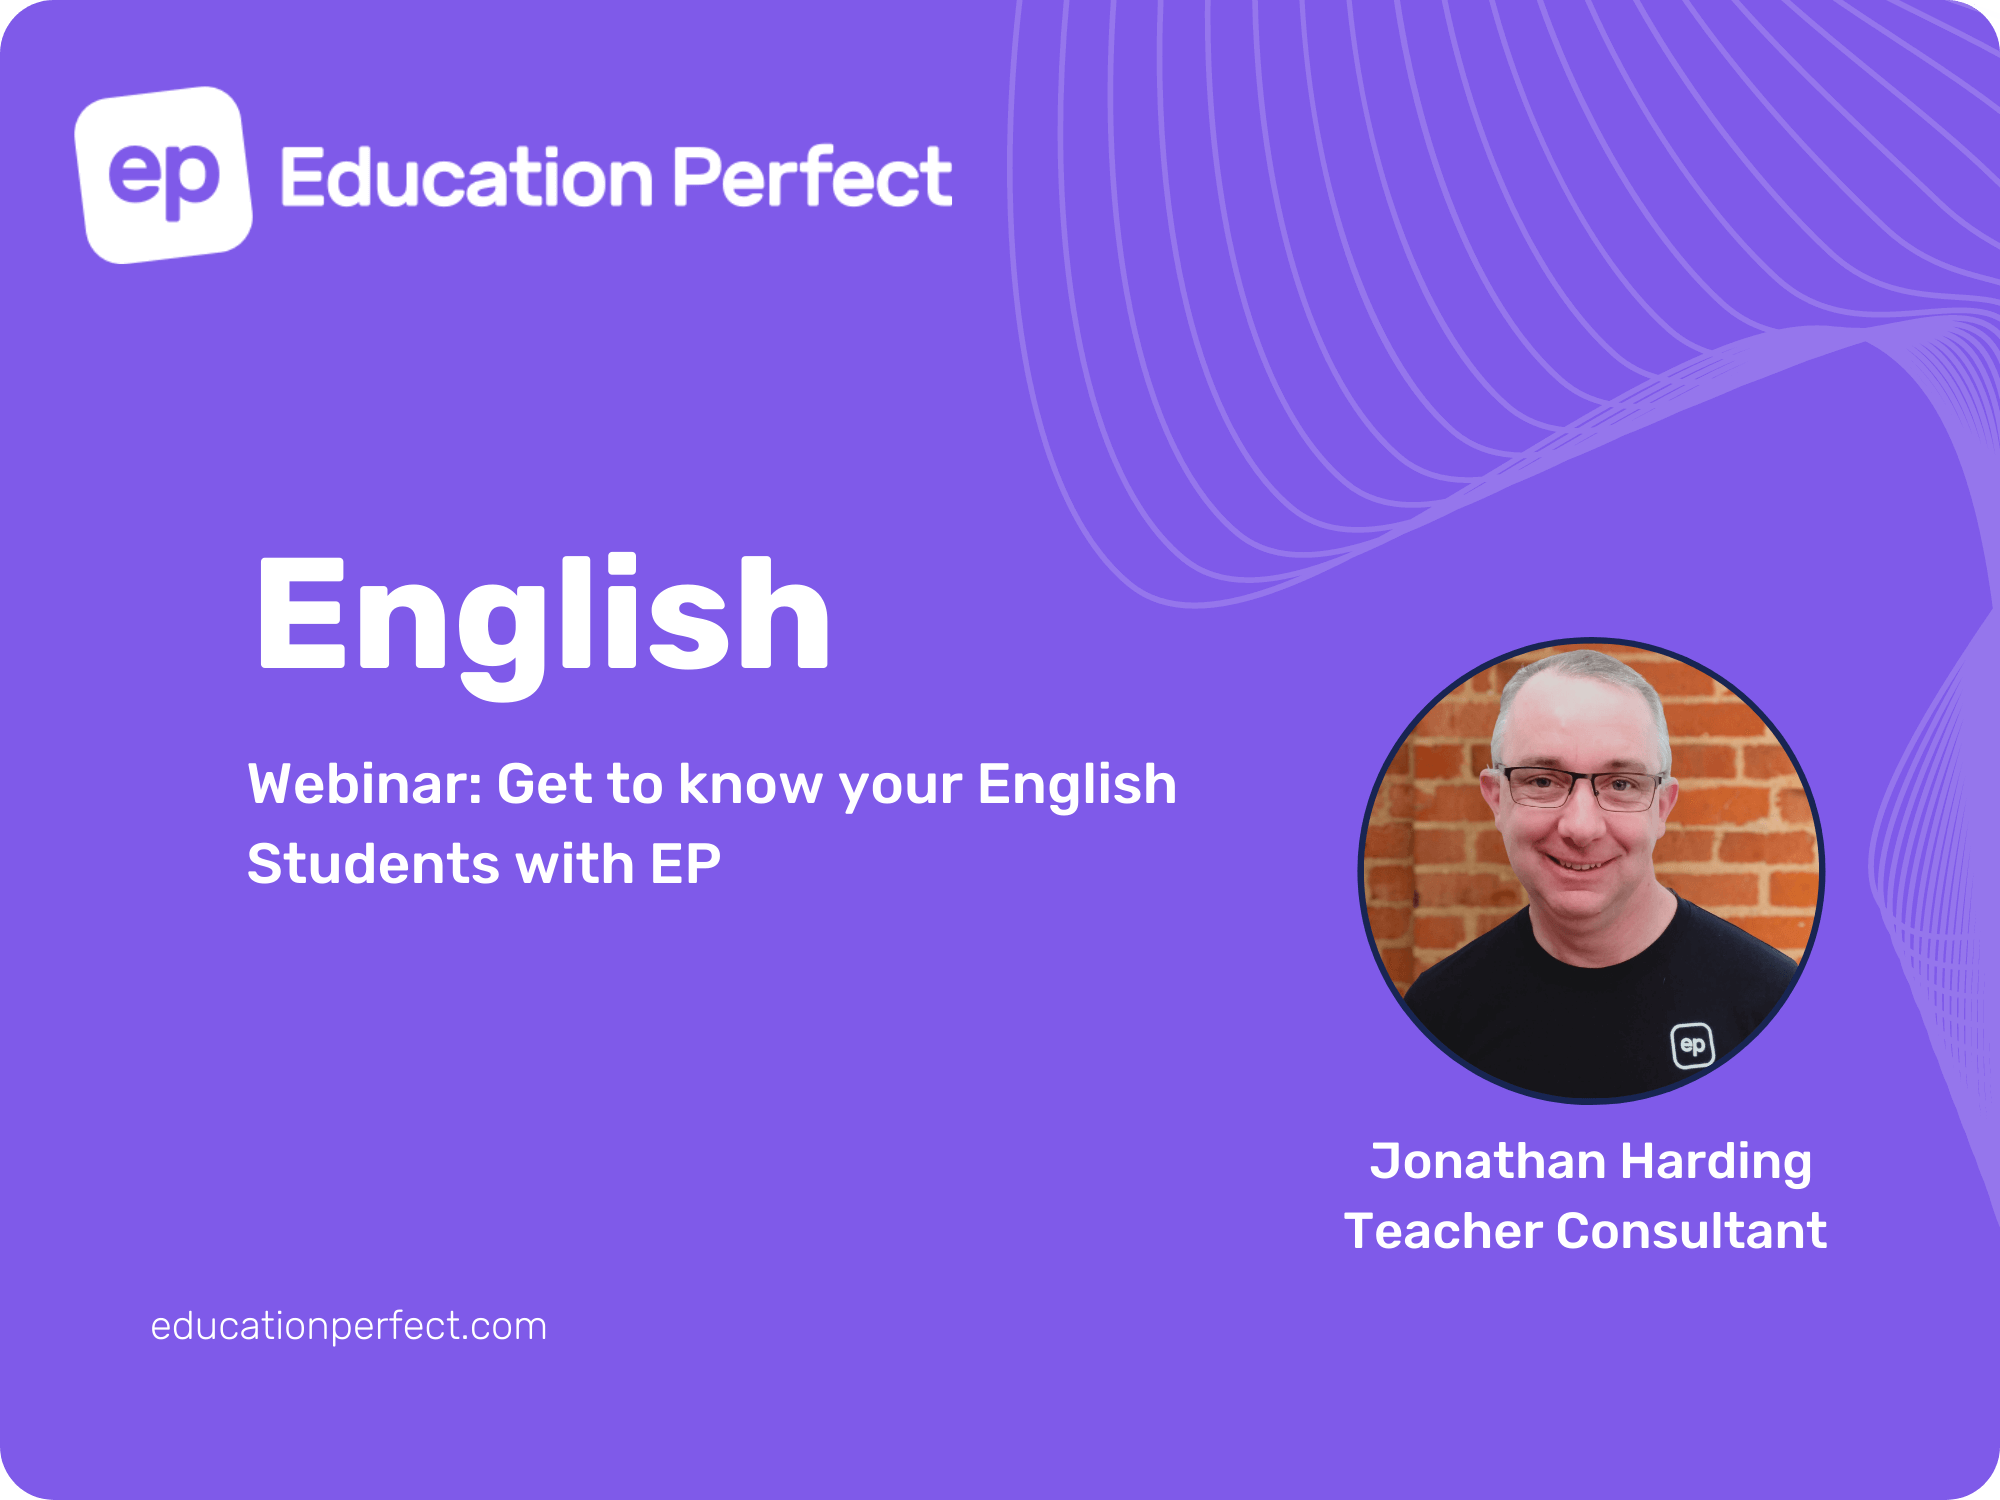 Get to know your English Students with EP